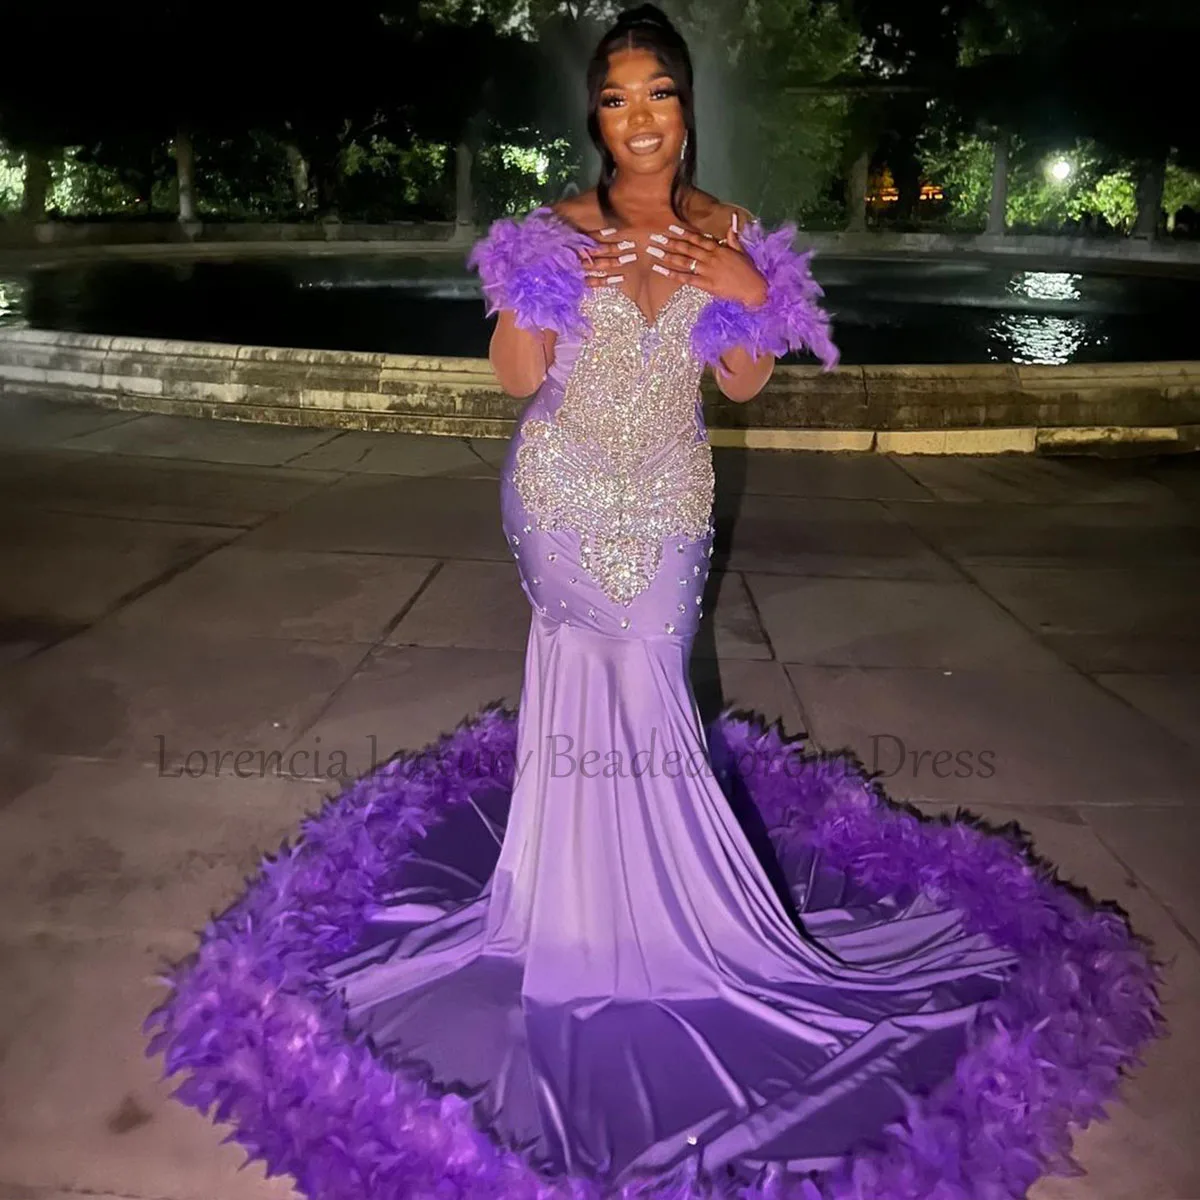 

Luxury Sparkly Mermaid Prom Dresses Black Girls Feather Sequin Beading Crystal Evening Party Gowns Sleeveless robes de soirée